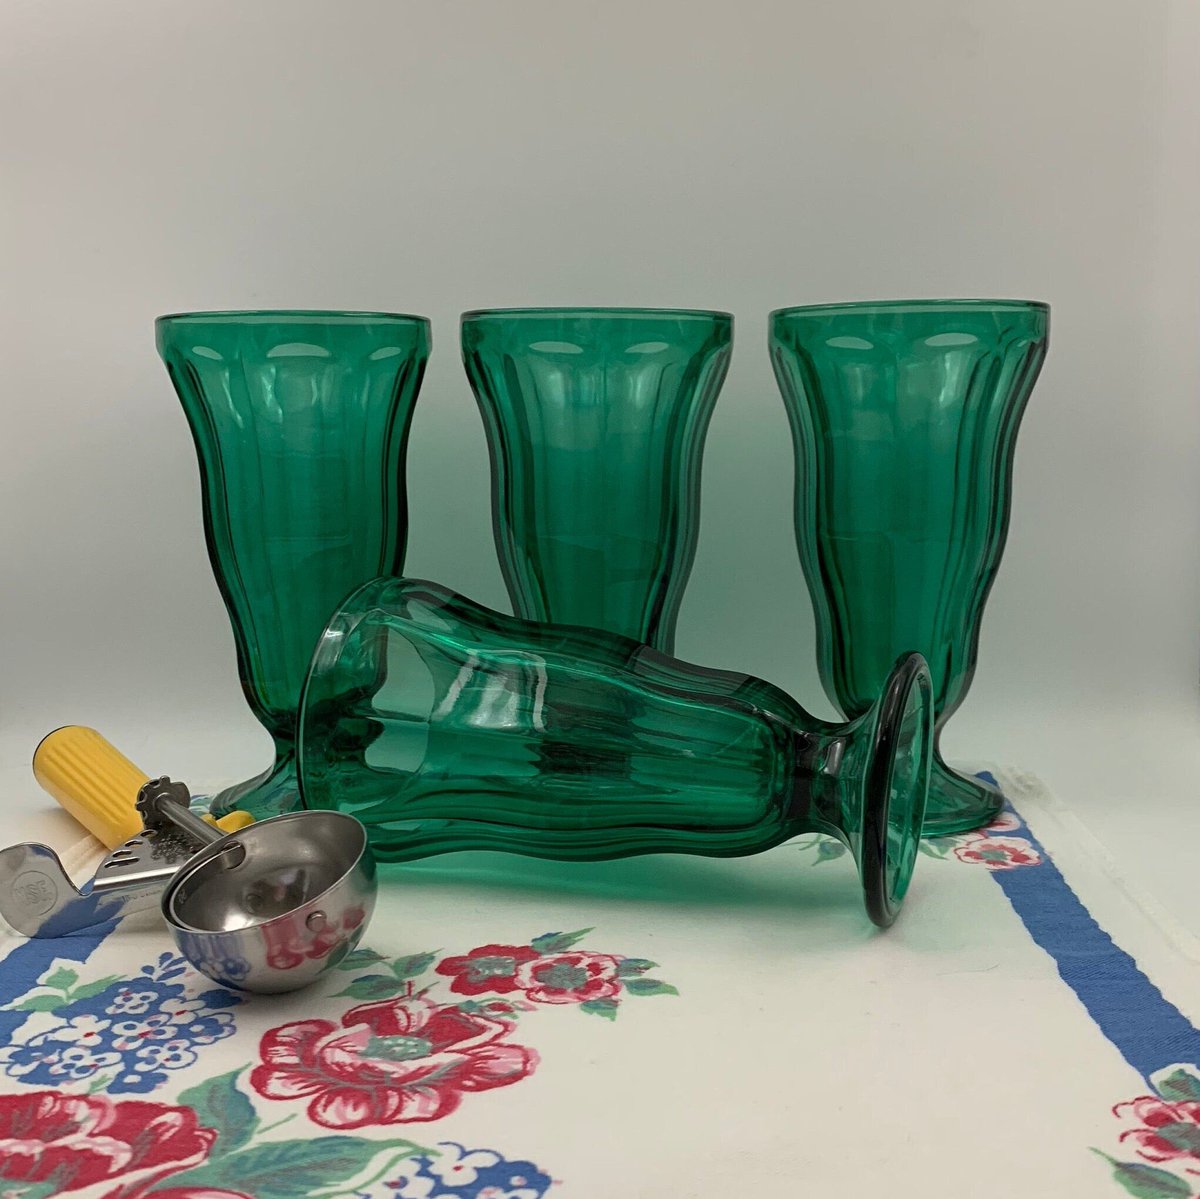 Excited to share this item from my #etsy shop: 4 Vintage Soda Tumblers by Anchor Hocking in Emerald Green, 12 oz. 7' XL Size, Fountain Drinks Malts, Shakes, #anchorhocking #sodatumbler #fountainware #vintageglassware #sodafountain #emeraldgreenglass etsy.me/42P1wct